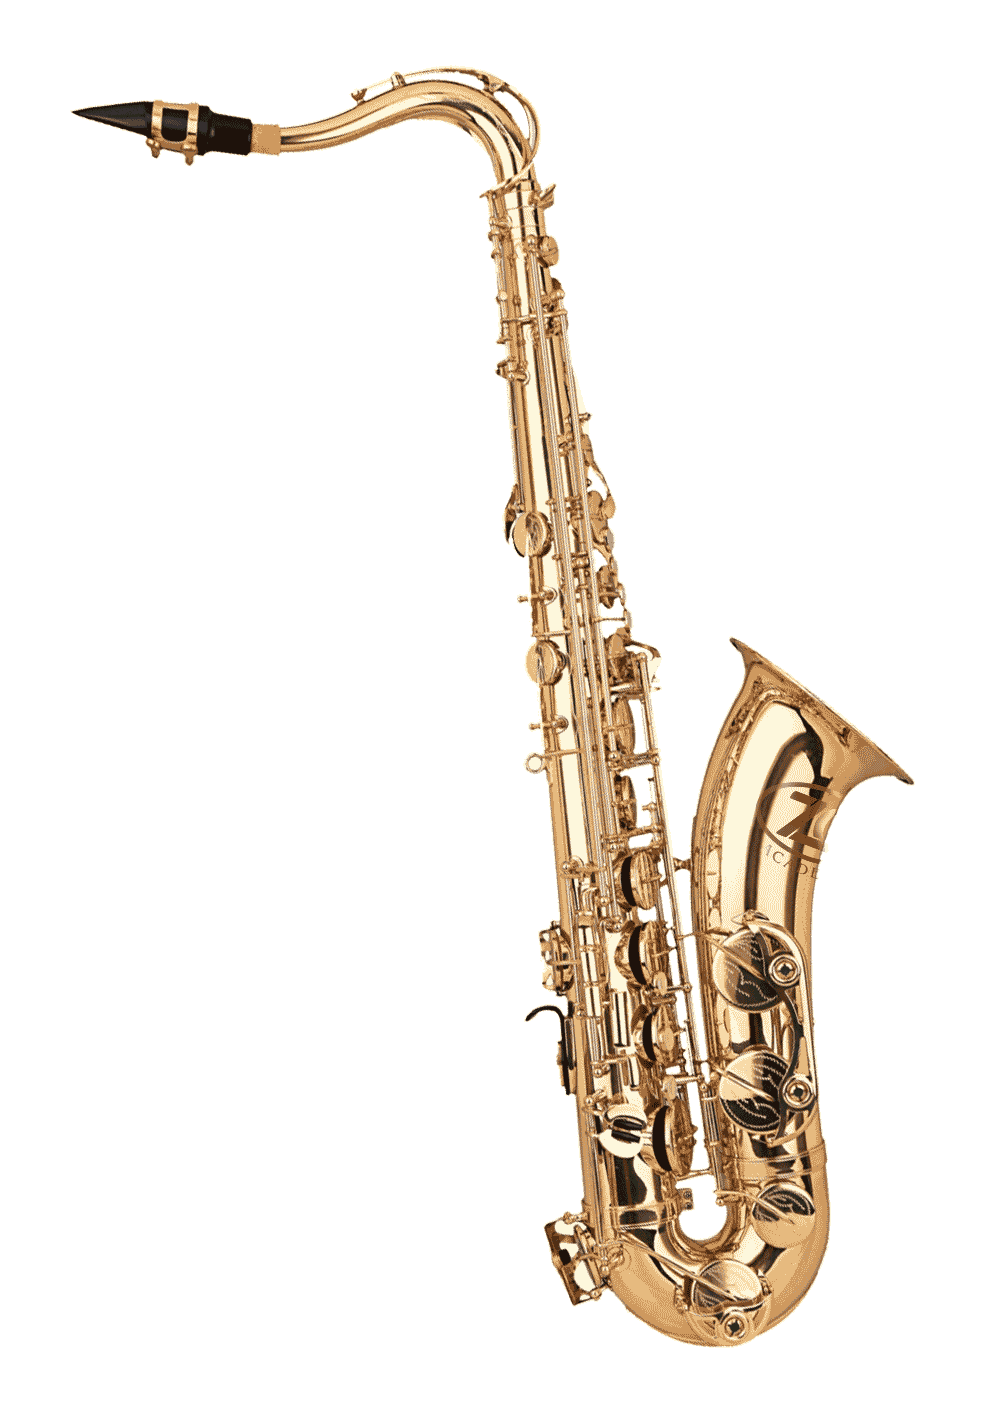 ZO Academy affordable saxophone for students